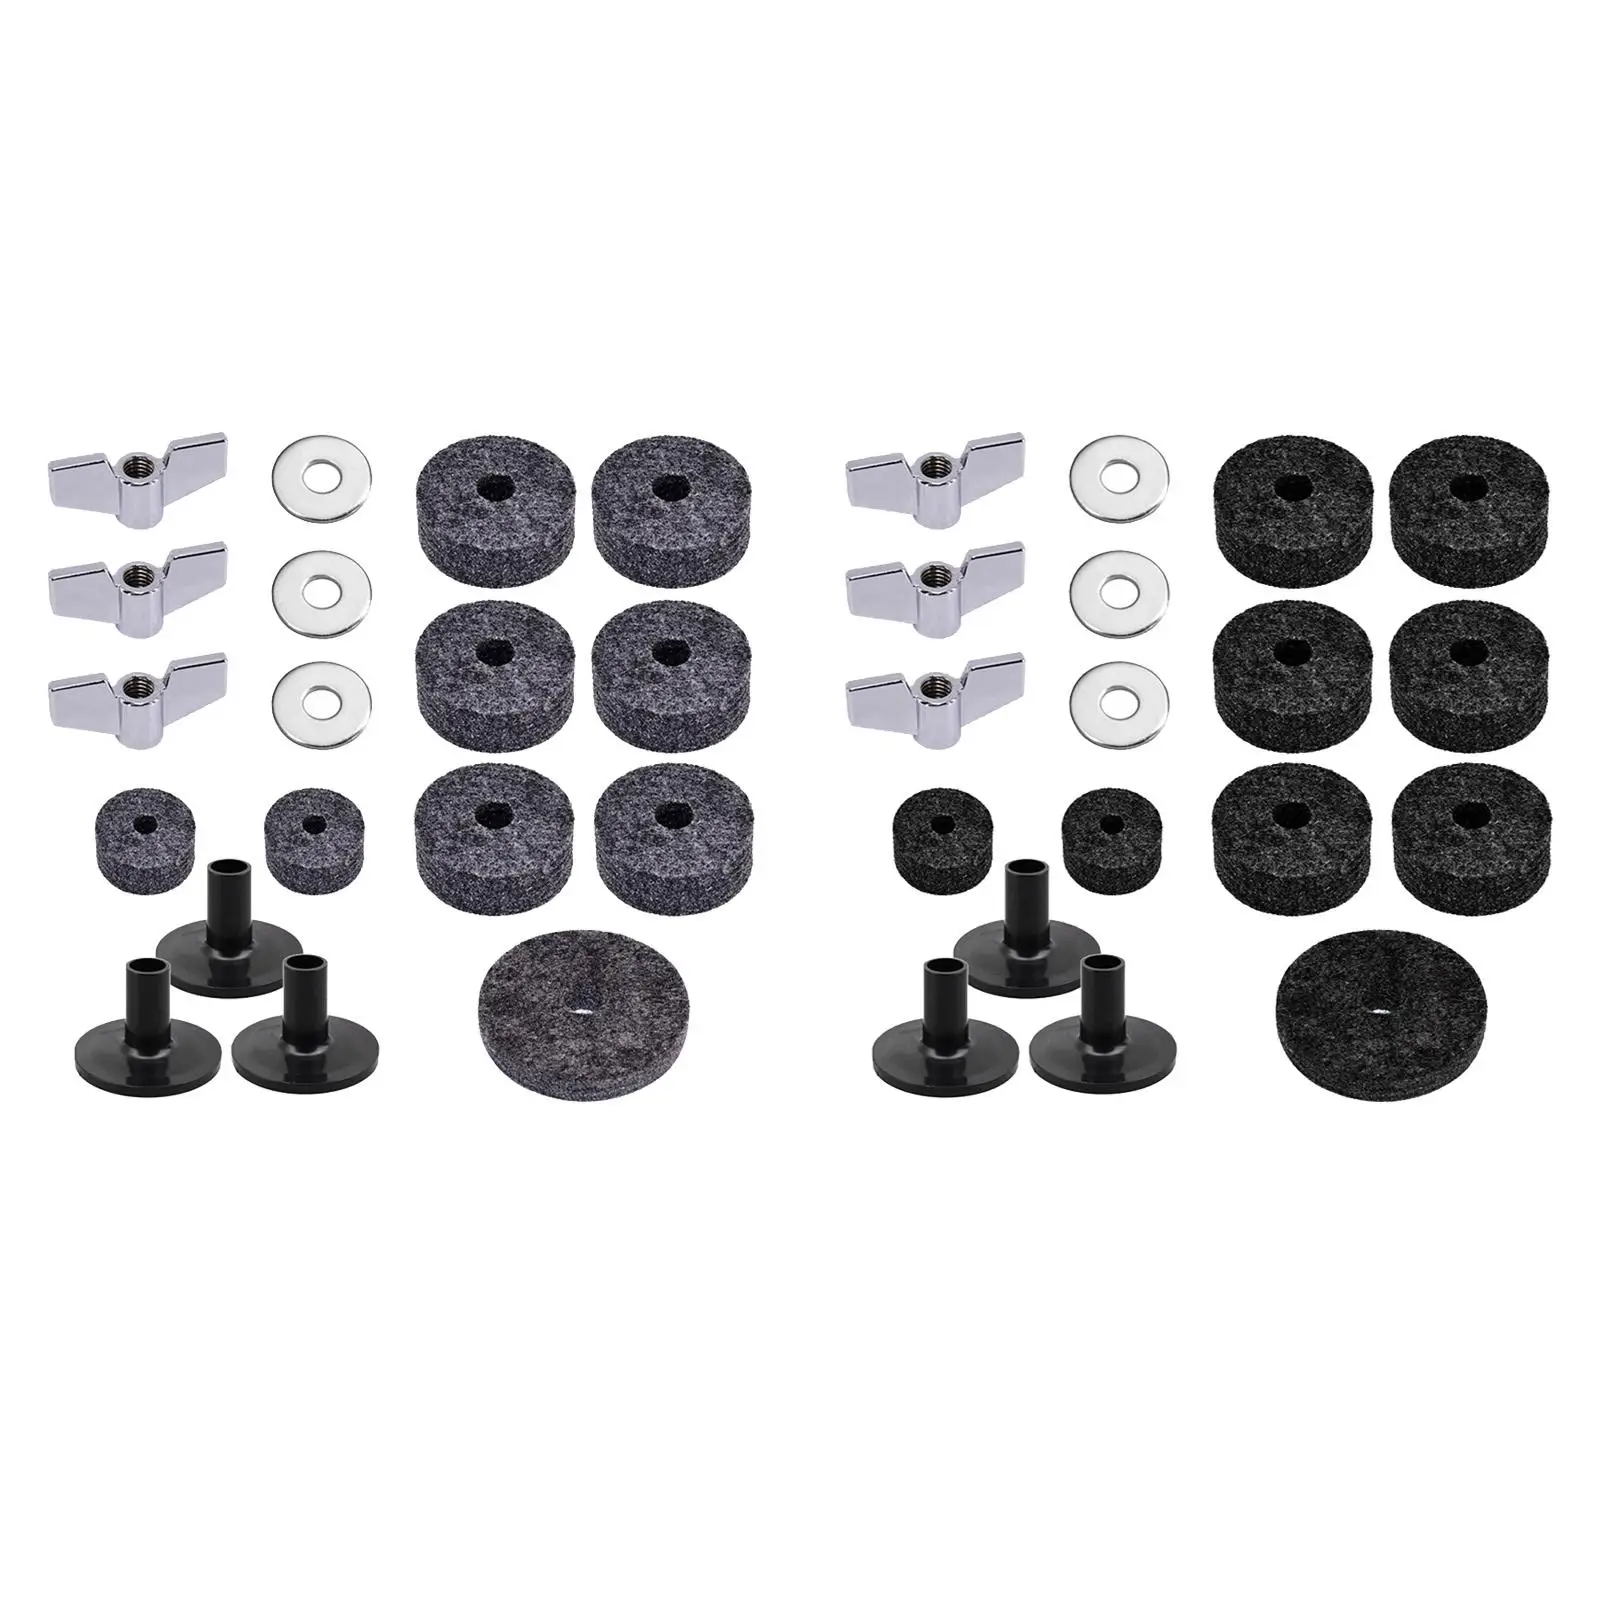 Drum Set Cymbal Felts Washers Replacement Accessories, Cymbal Washer, Drum Replacement Parts, for Performance Music Stage